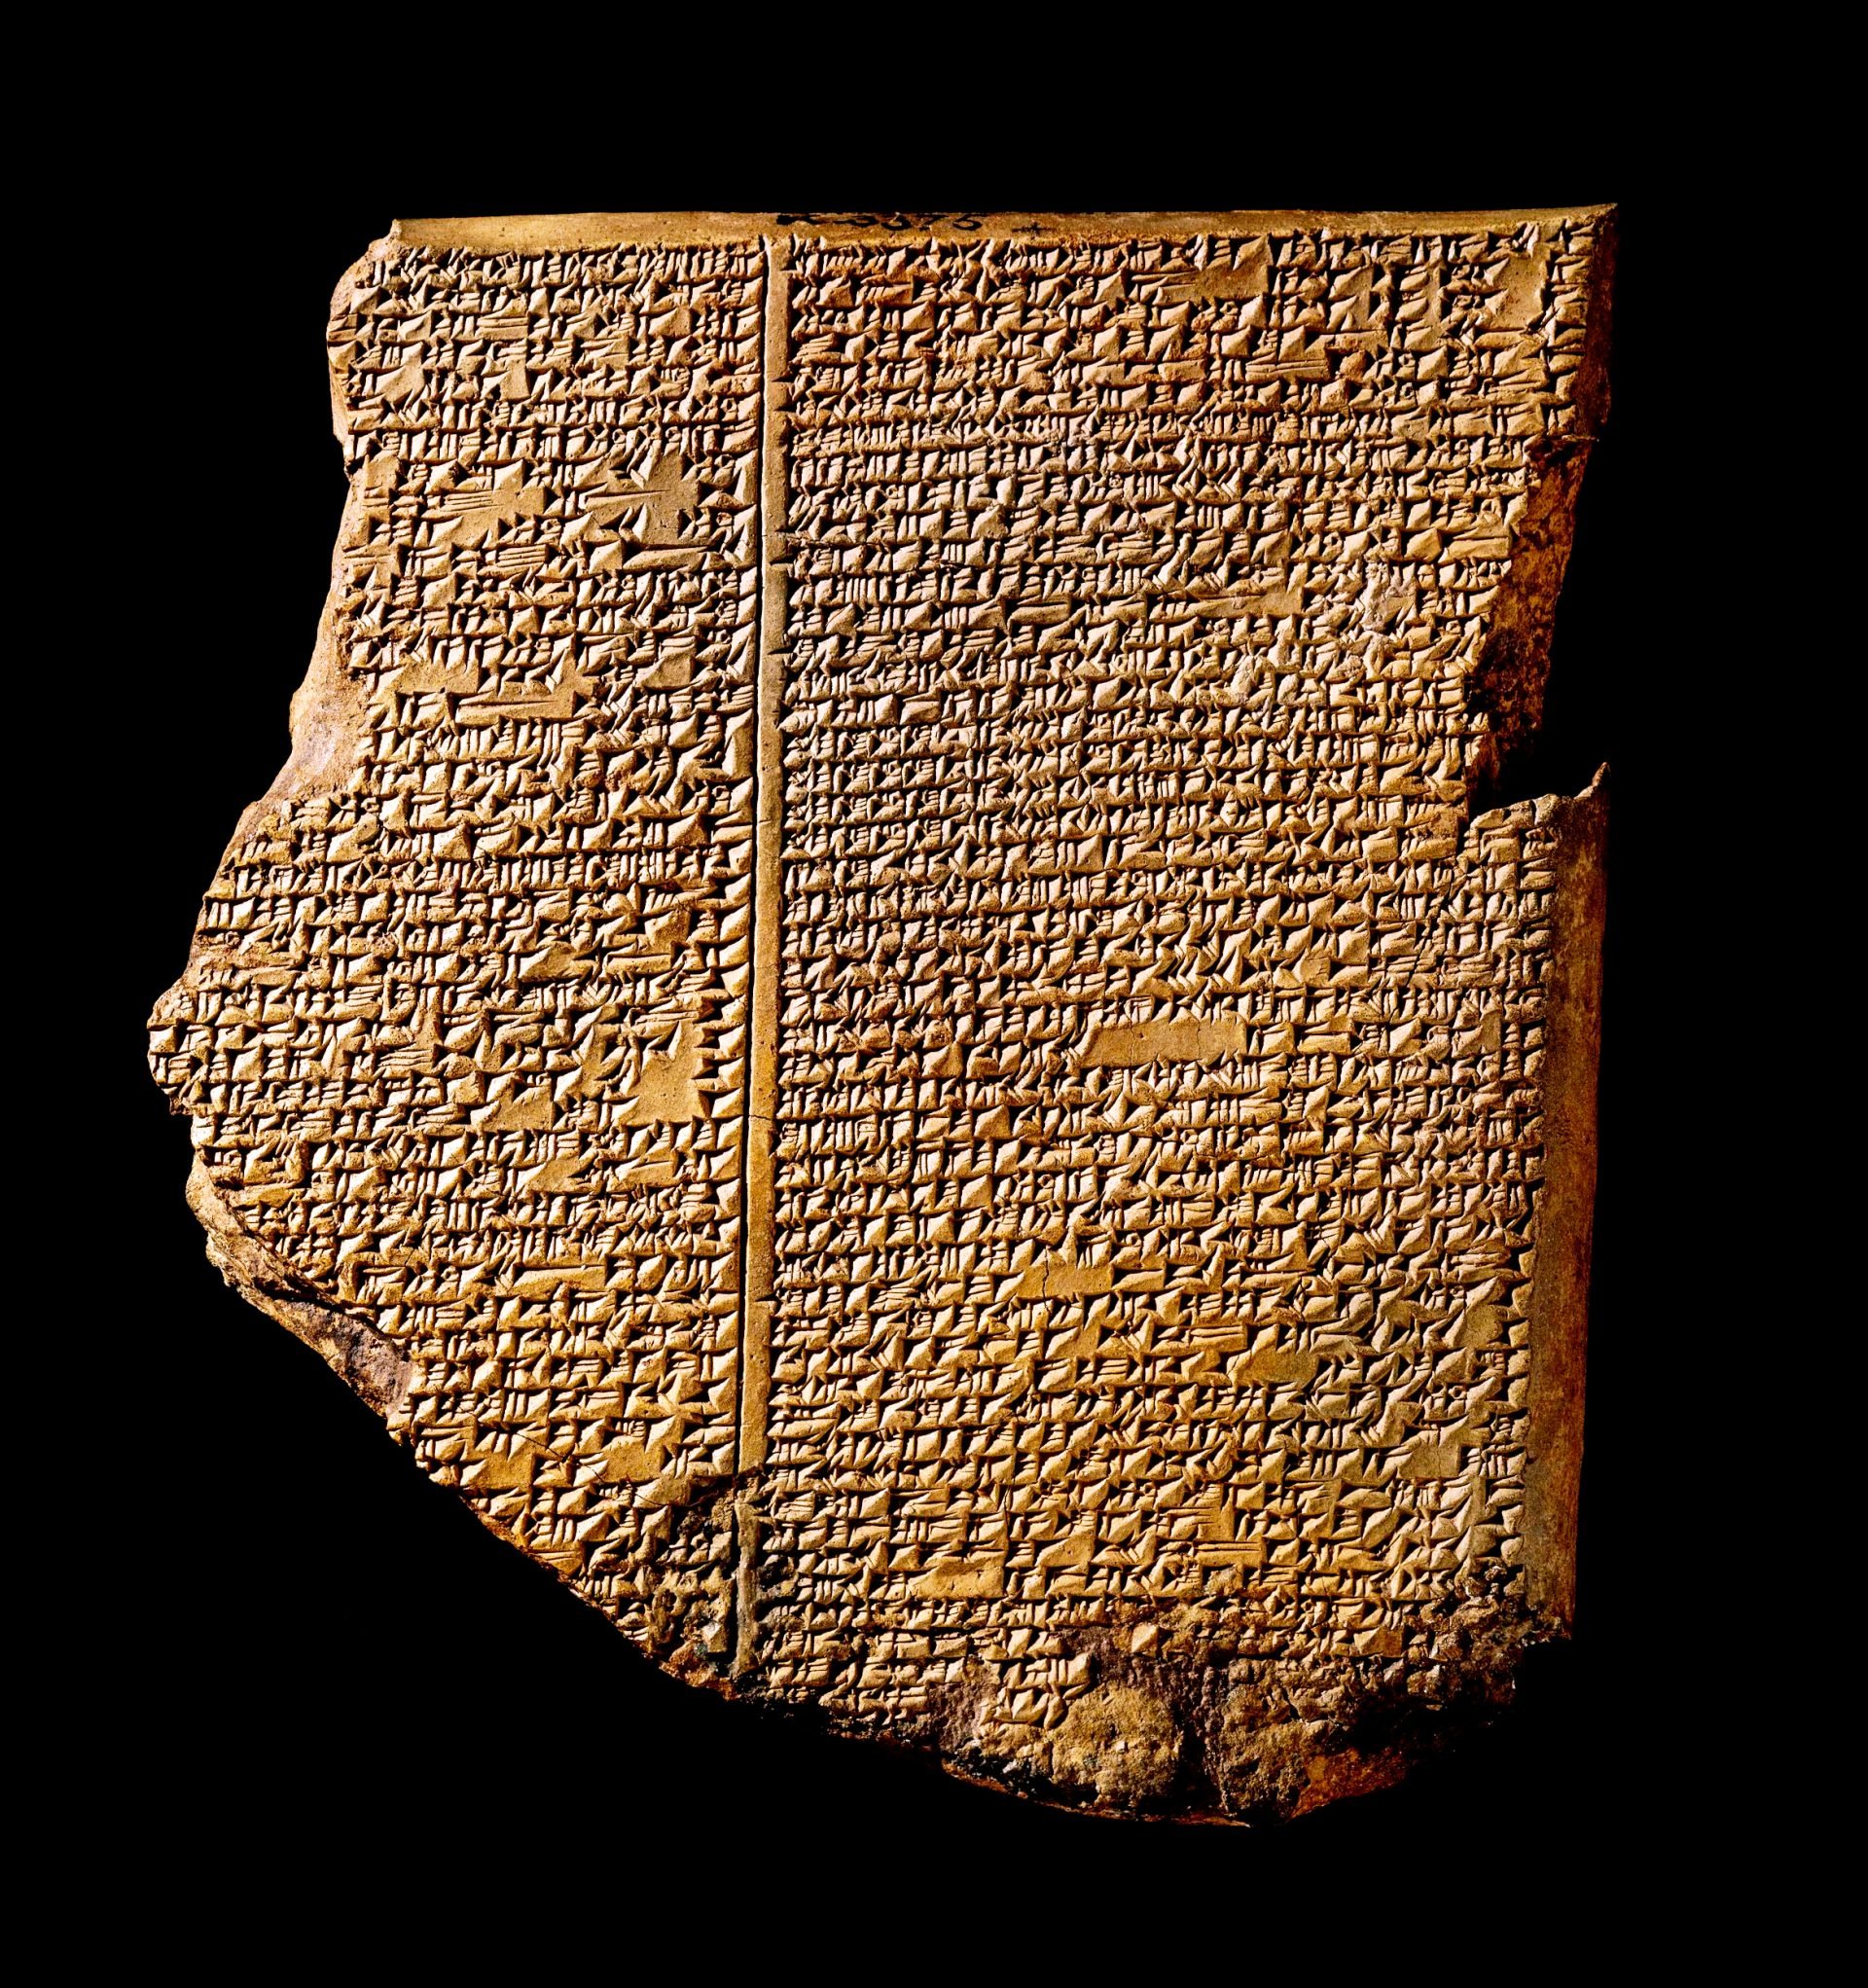 A photo realistic image of a fragment of an ancient clay tablet with cuneiform writing on a black background. The tablet is broken and incomplete, with the top left corner missing. The cuneiform writing is in a grid-like pattern, with each line separated by a horizontal line. The tablet is light brown and has minor chips and cracks.